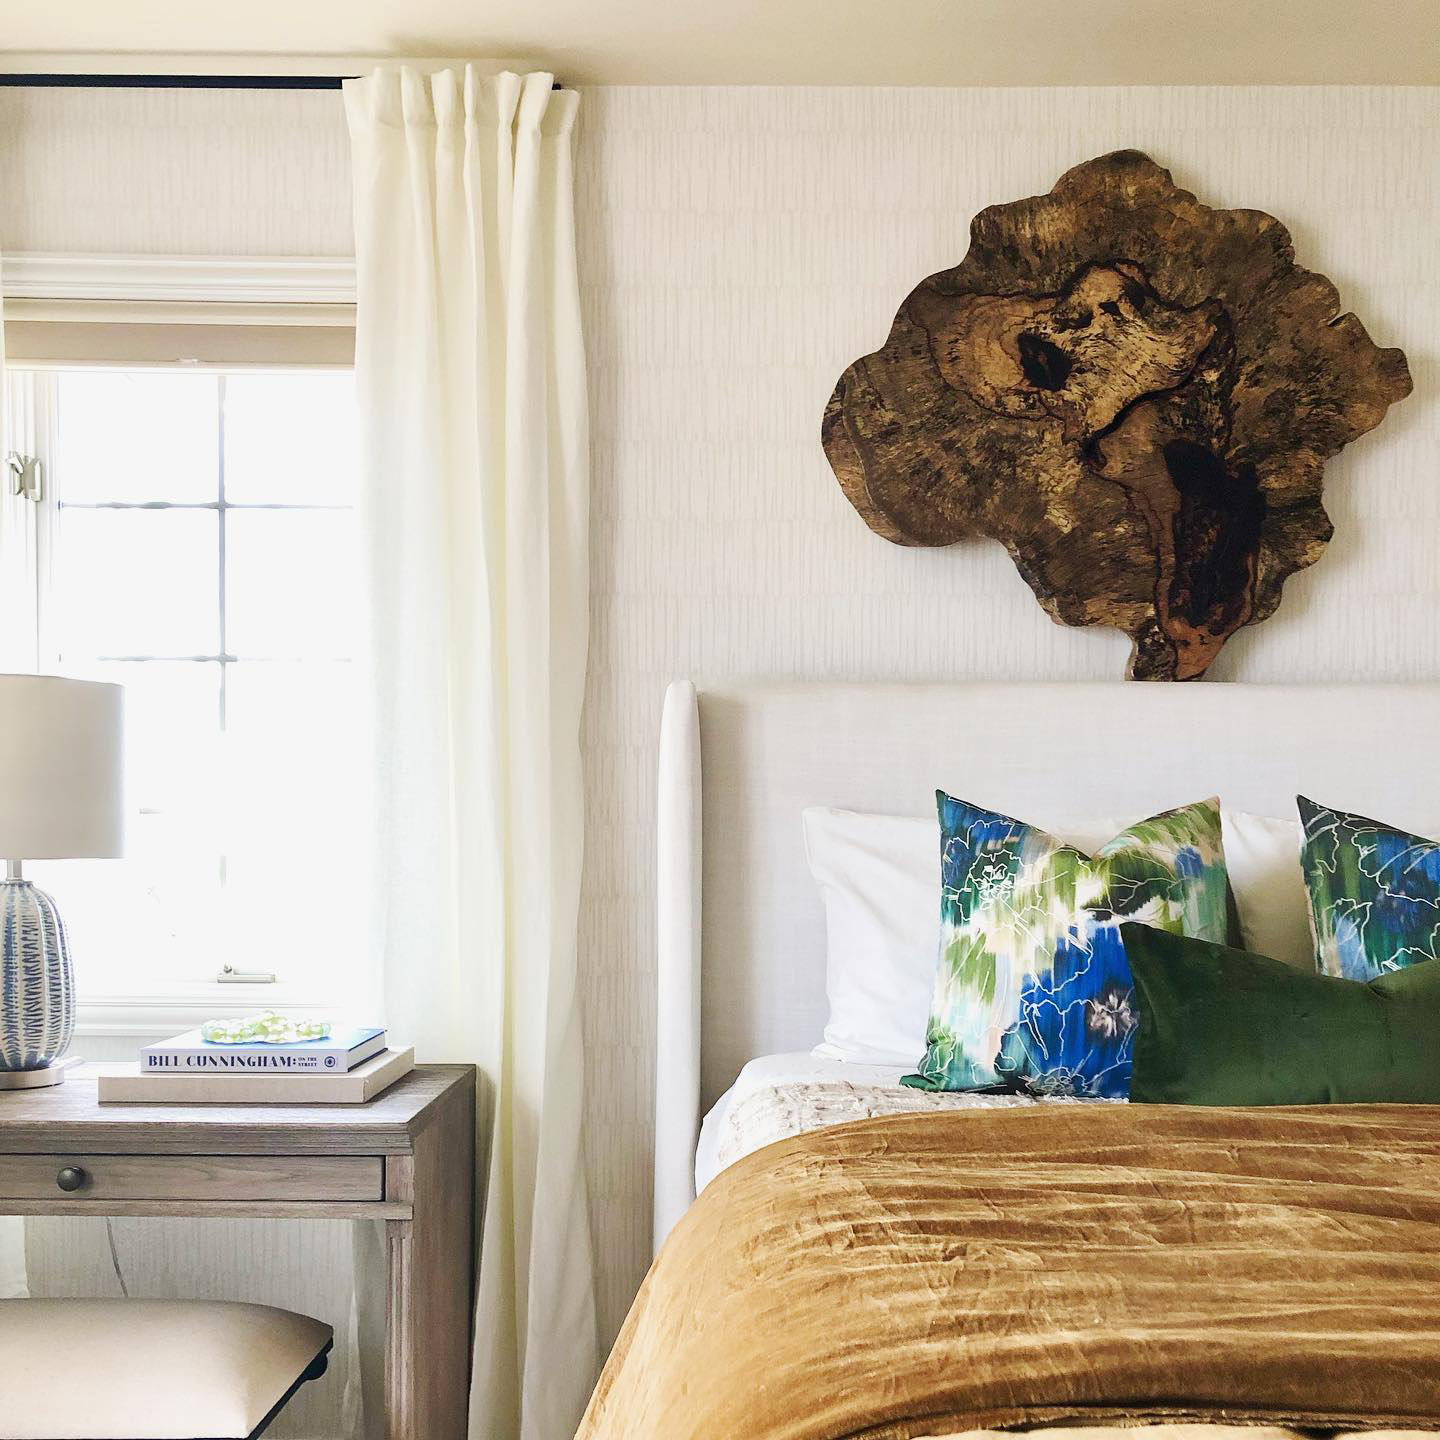 Down to earth and utterly serene, this bedroom is a coastal styled space that will instantly recharge you